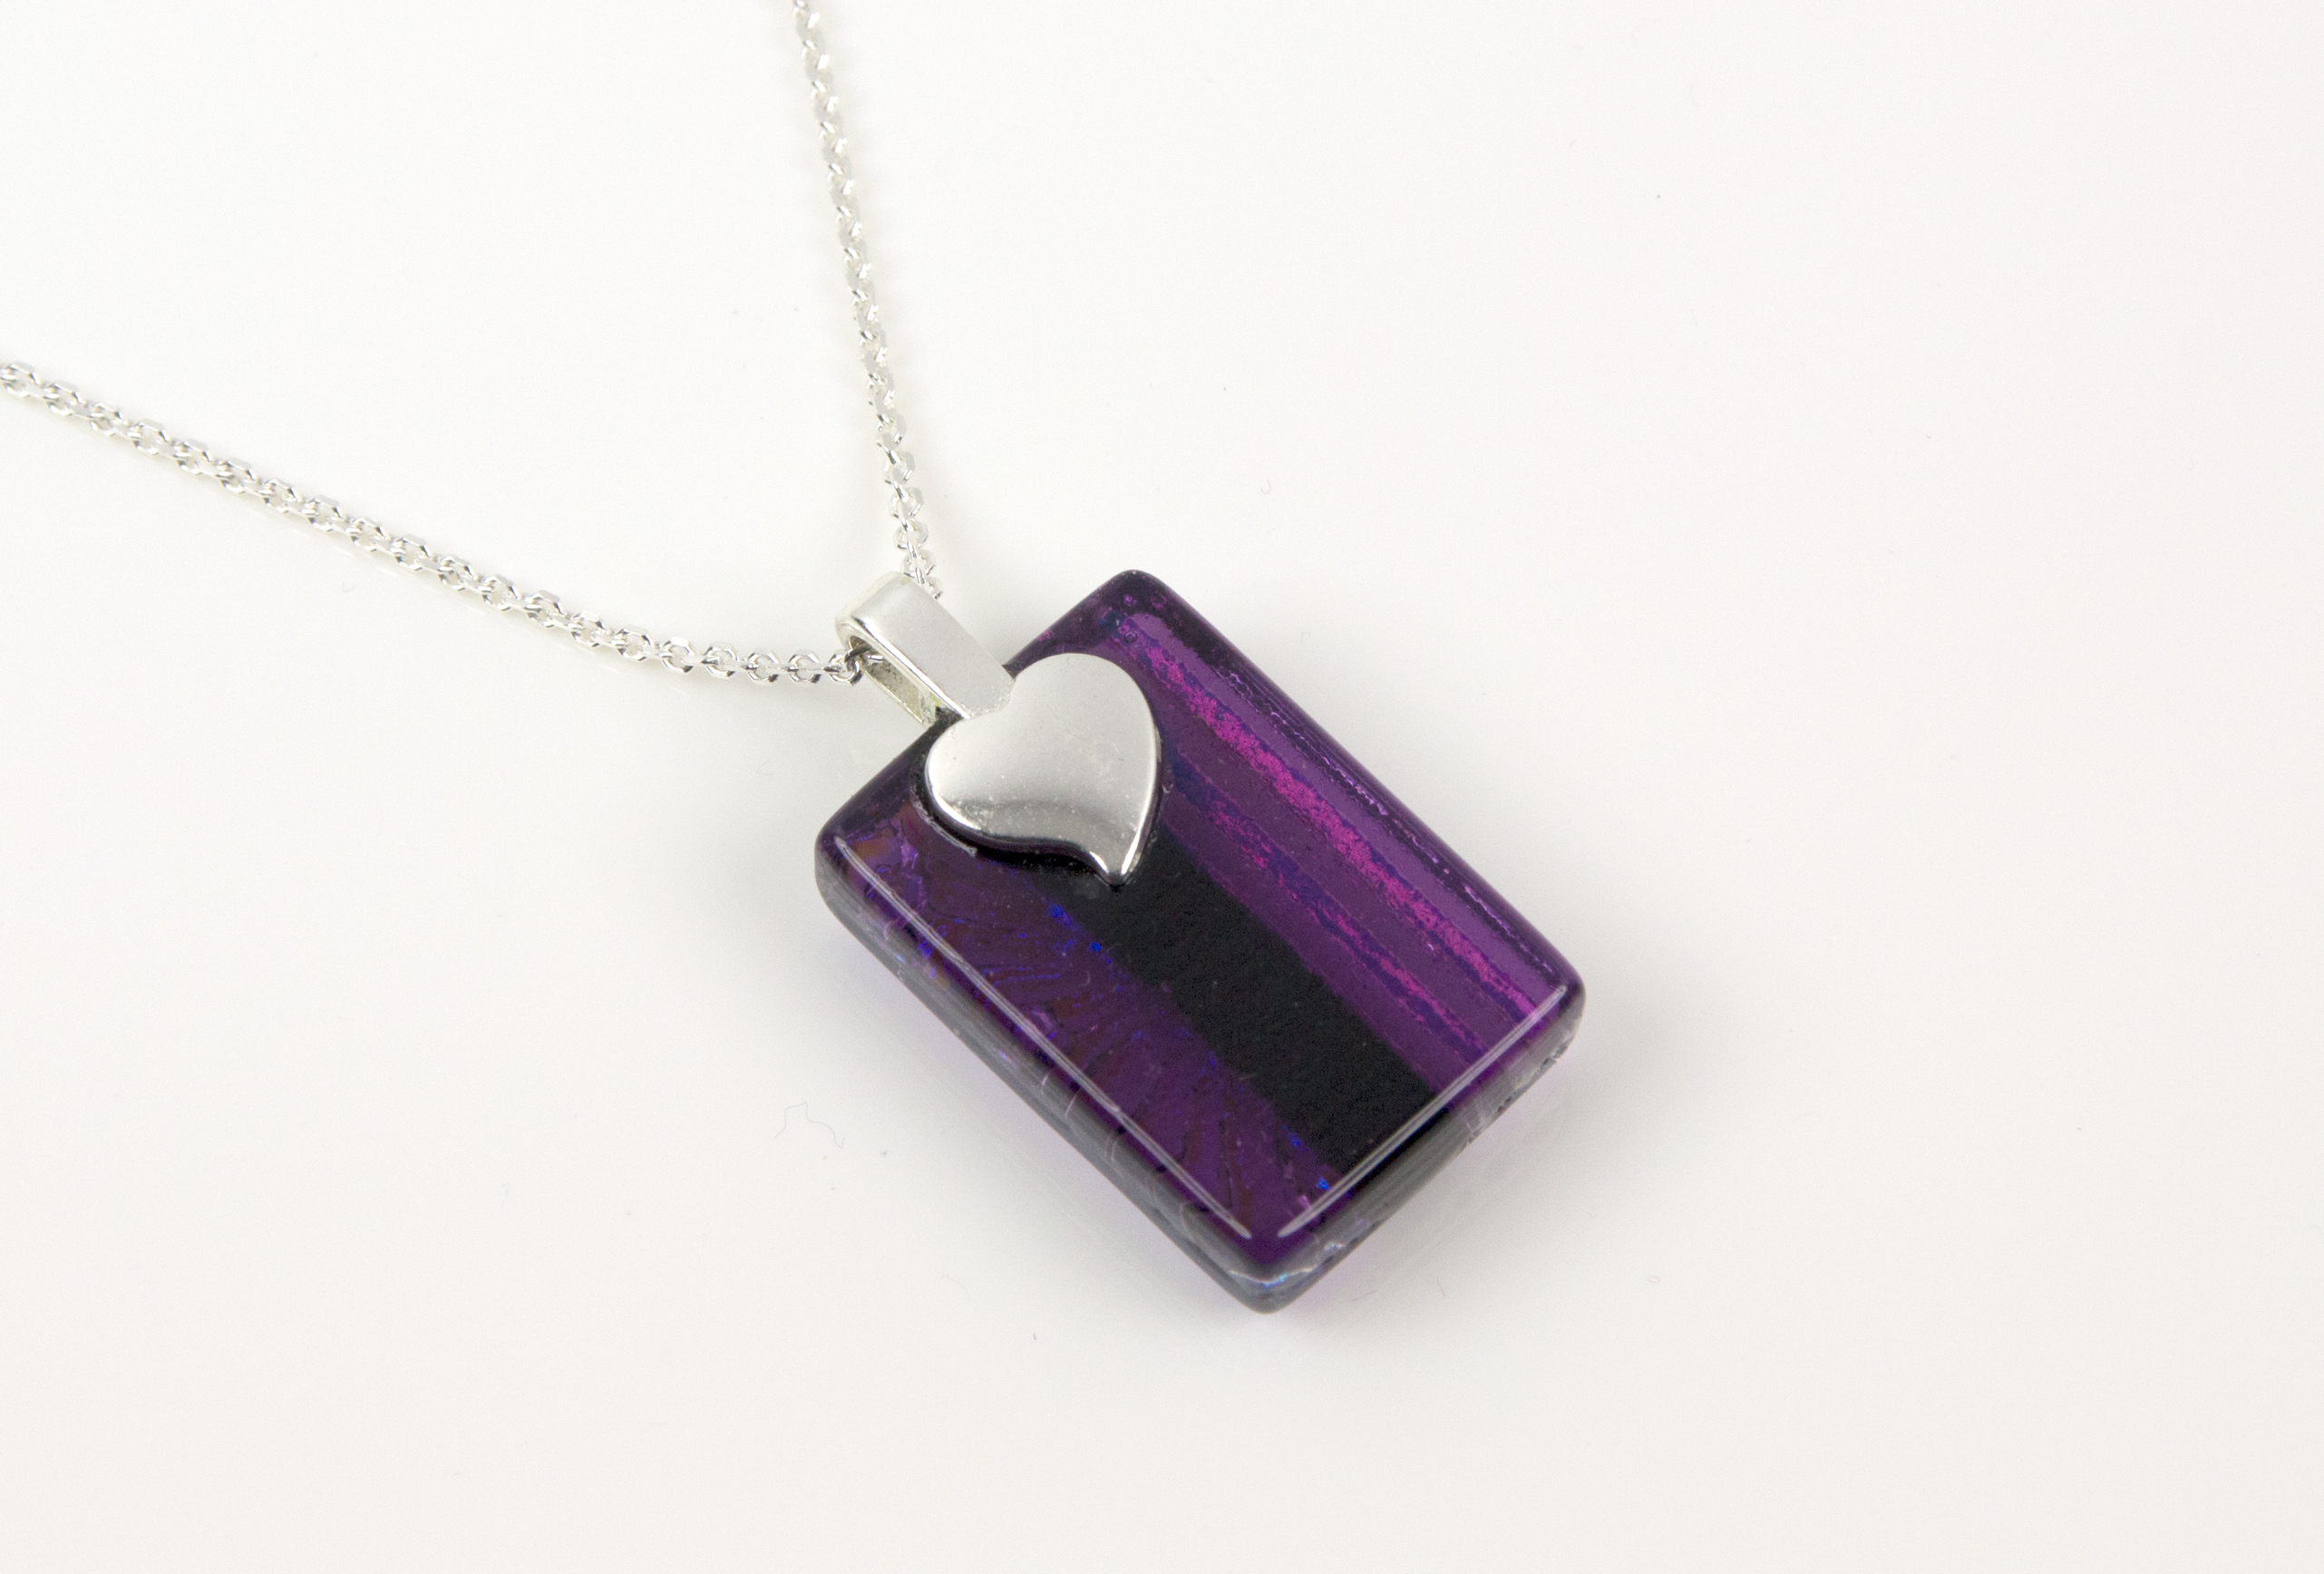 Handmade glass pendant necklace with a clear violet base and a mix of subtle dichroic starburst and textured lines, divided by bold violet dichroic. Sterling silver 16-18" chain.